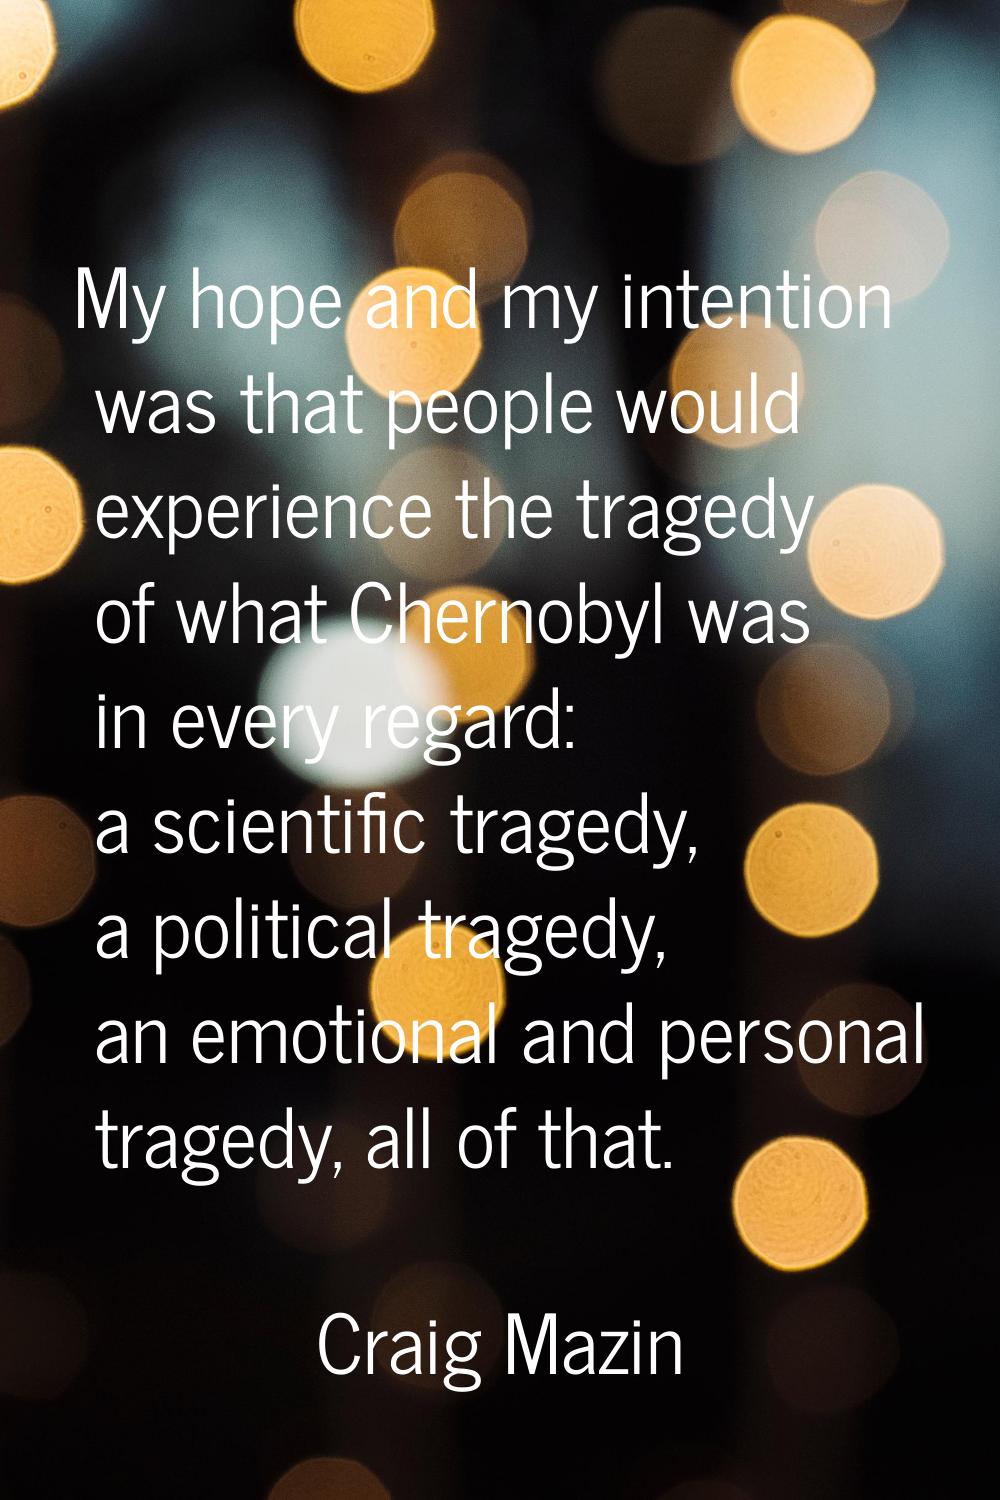 My hope and my intention was that people would experience the tragedy of what Chernobyl was in ever